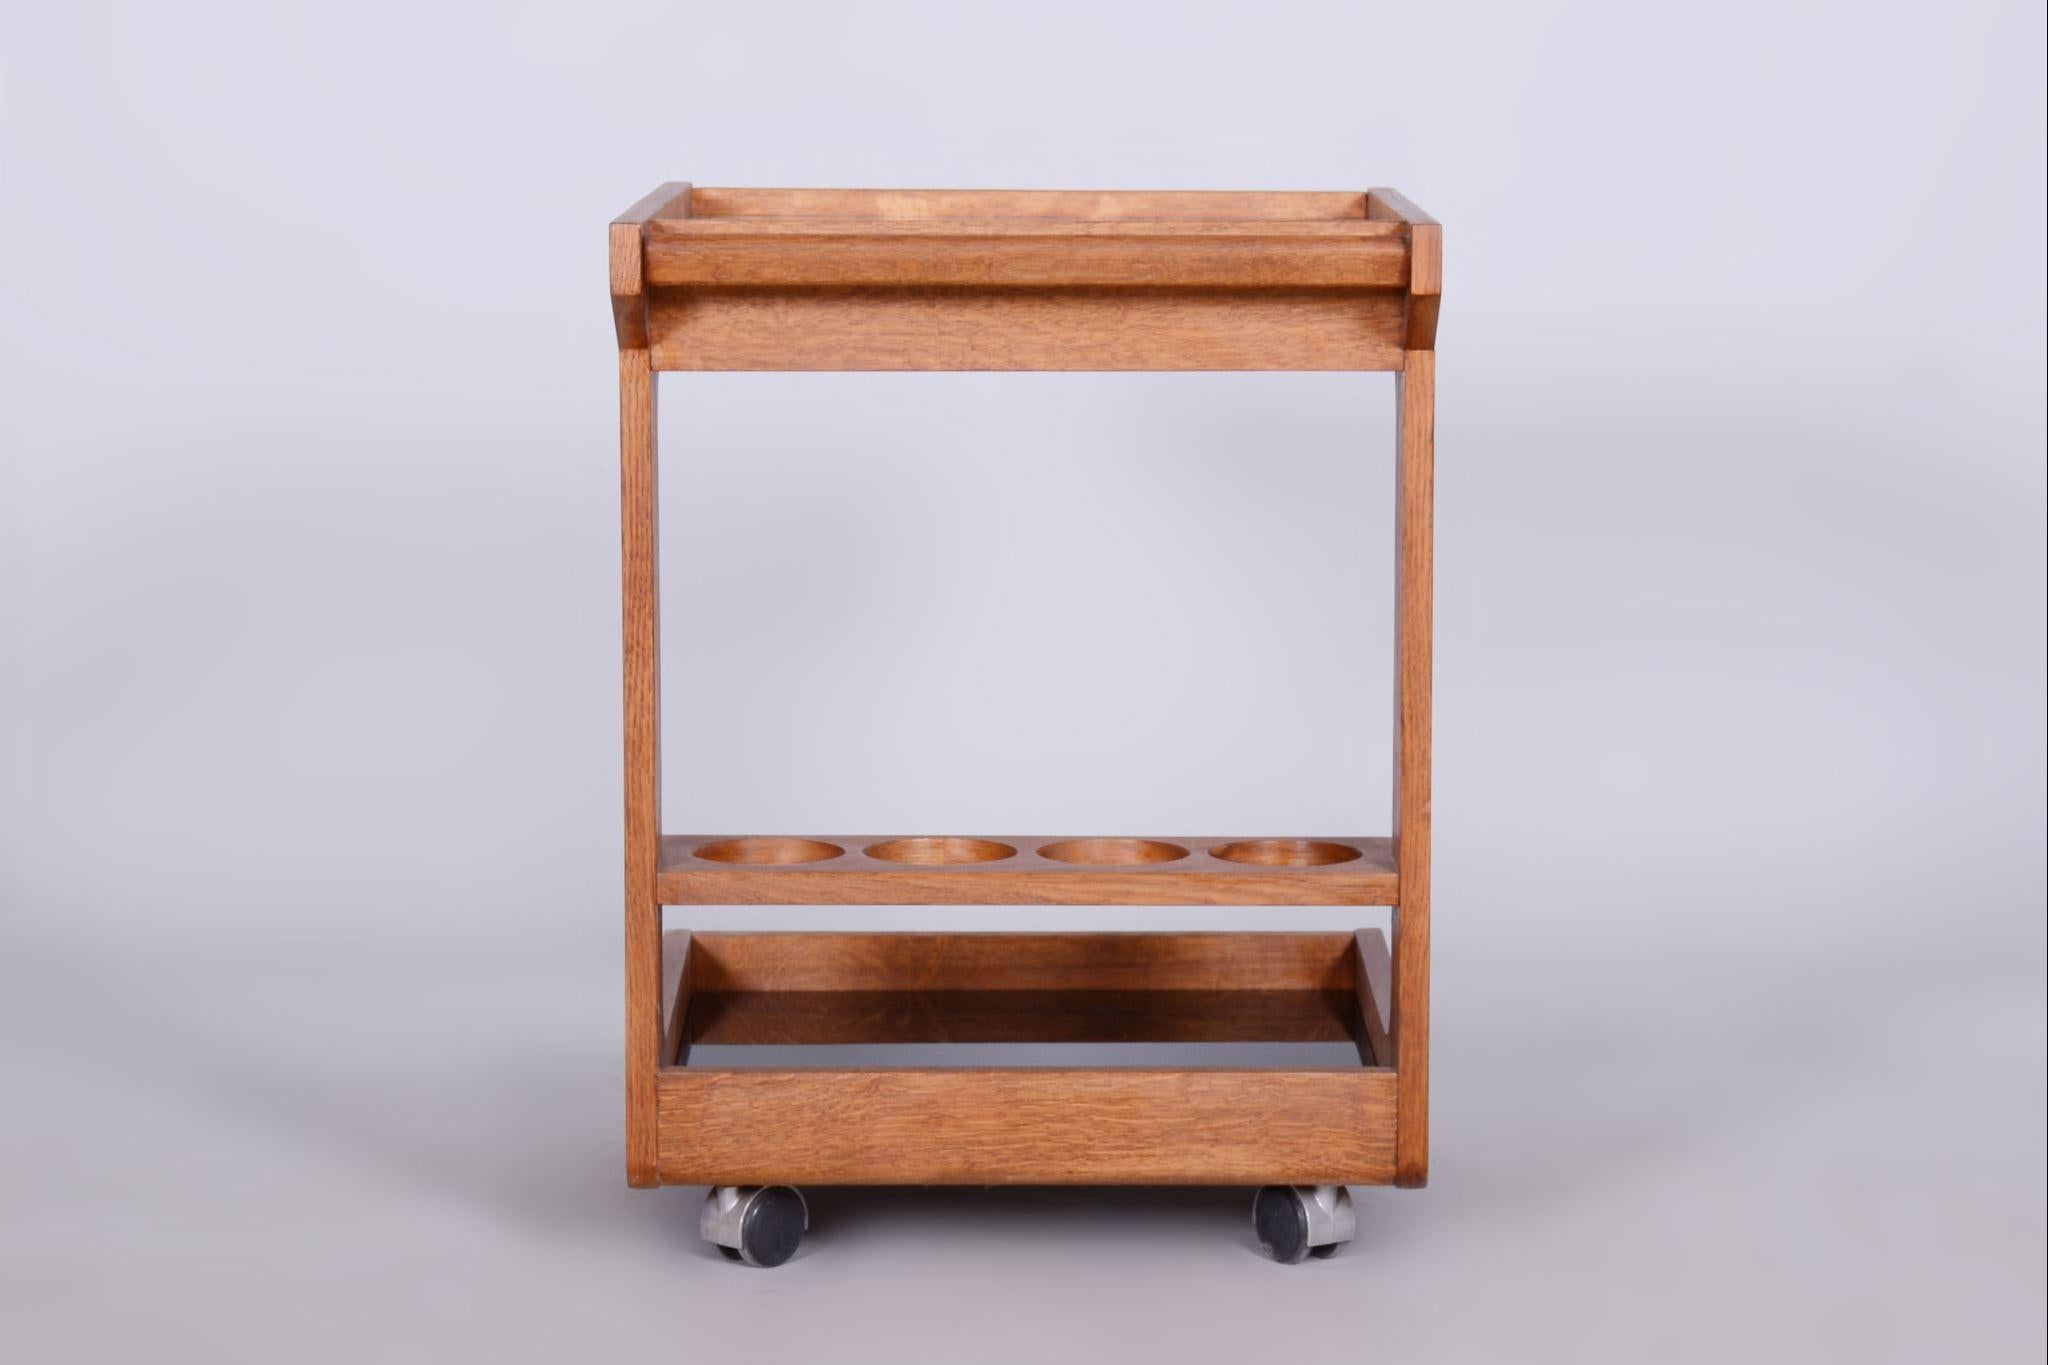 20th Century Restored Midcentury Trolley, Mahogany, Glass, Revived Polish, Czechia, 1960s For Sale